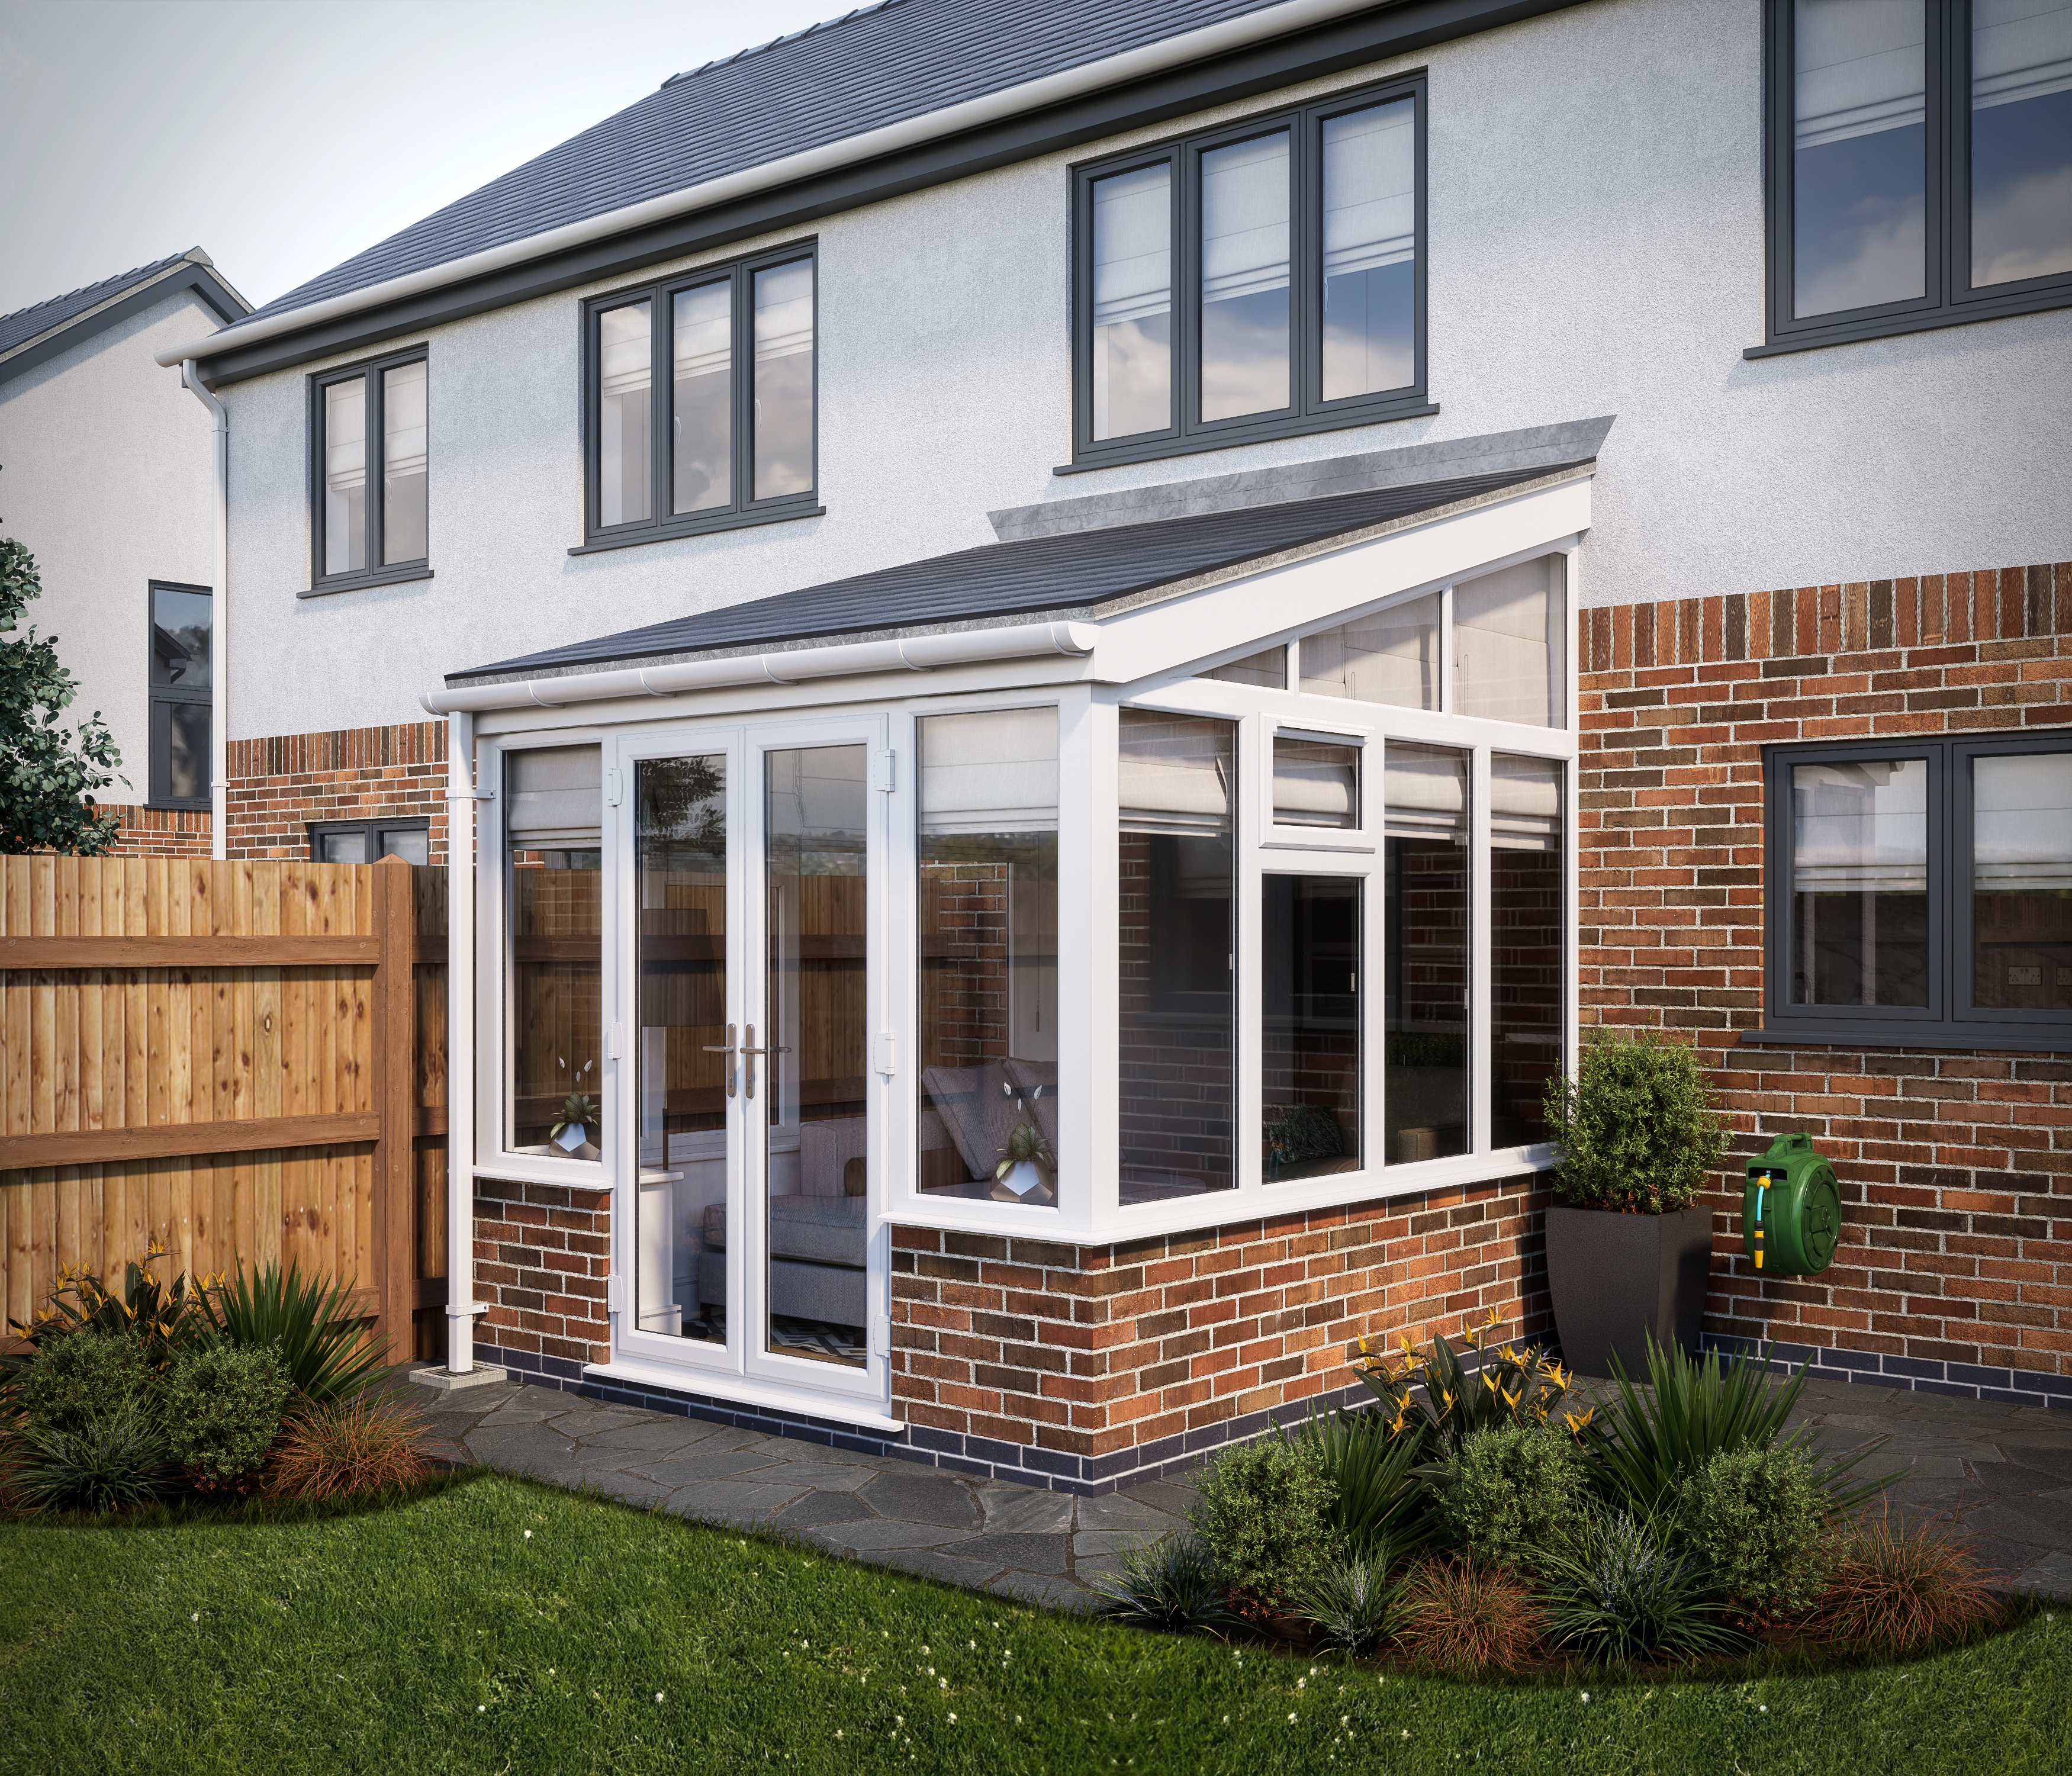 SOLid roof Lean to Conservatory White Frames Dwarf Wall with Titanium Grey Tiles